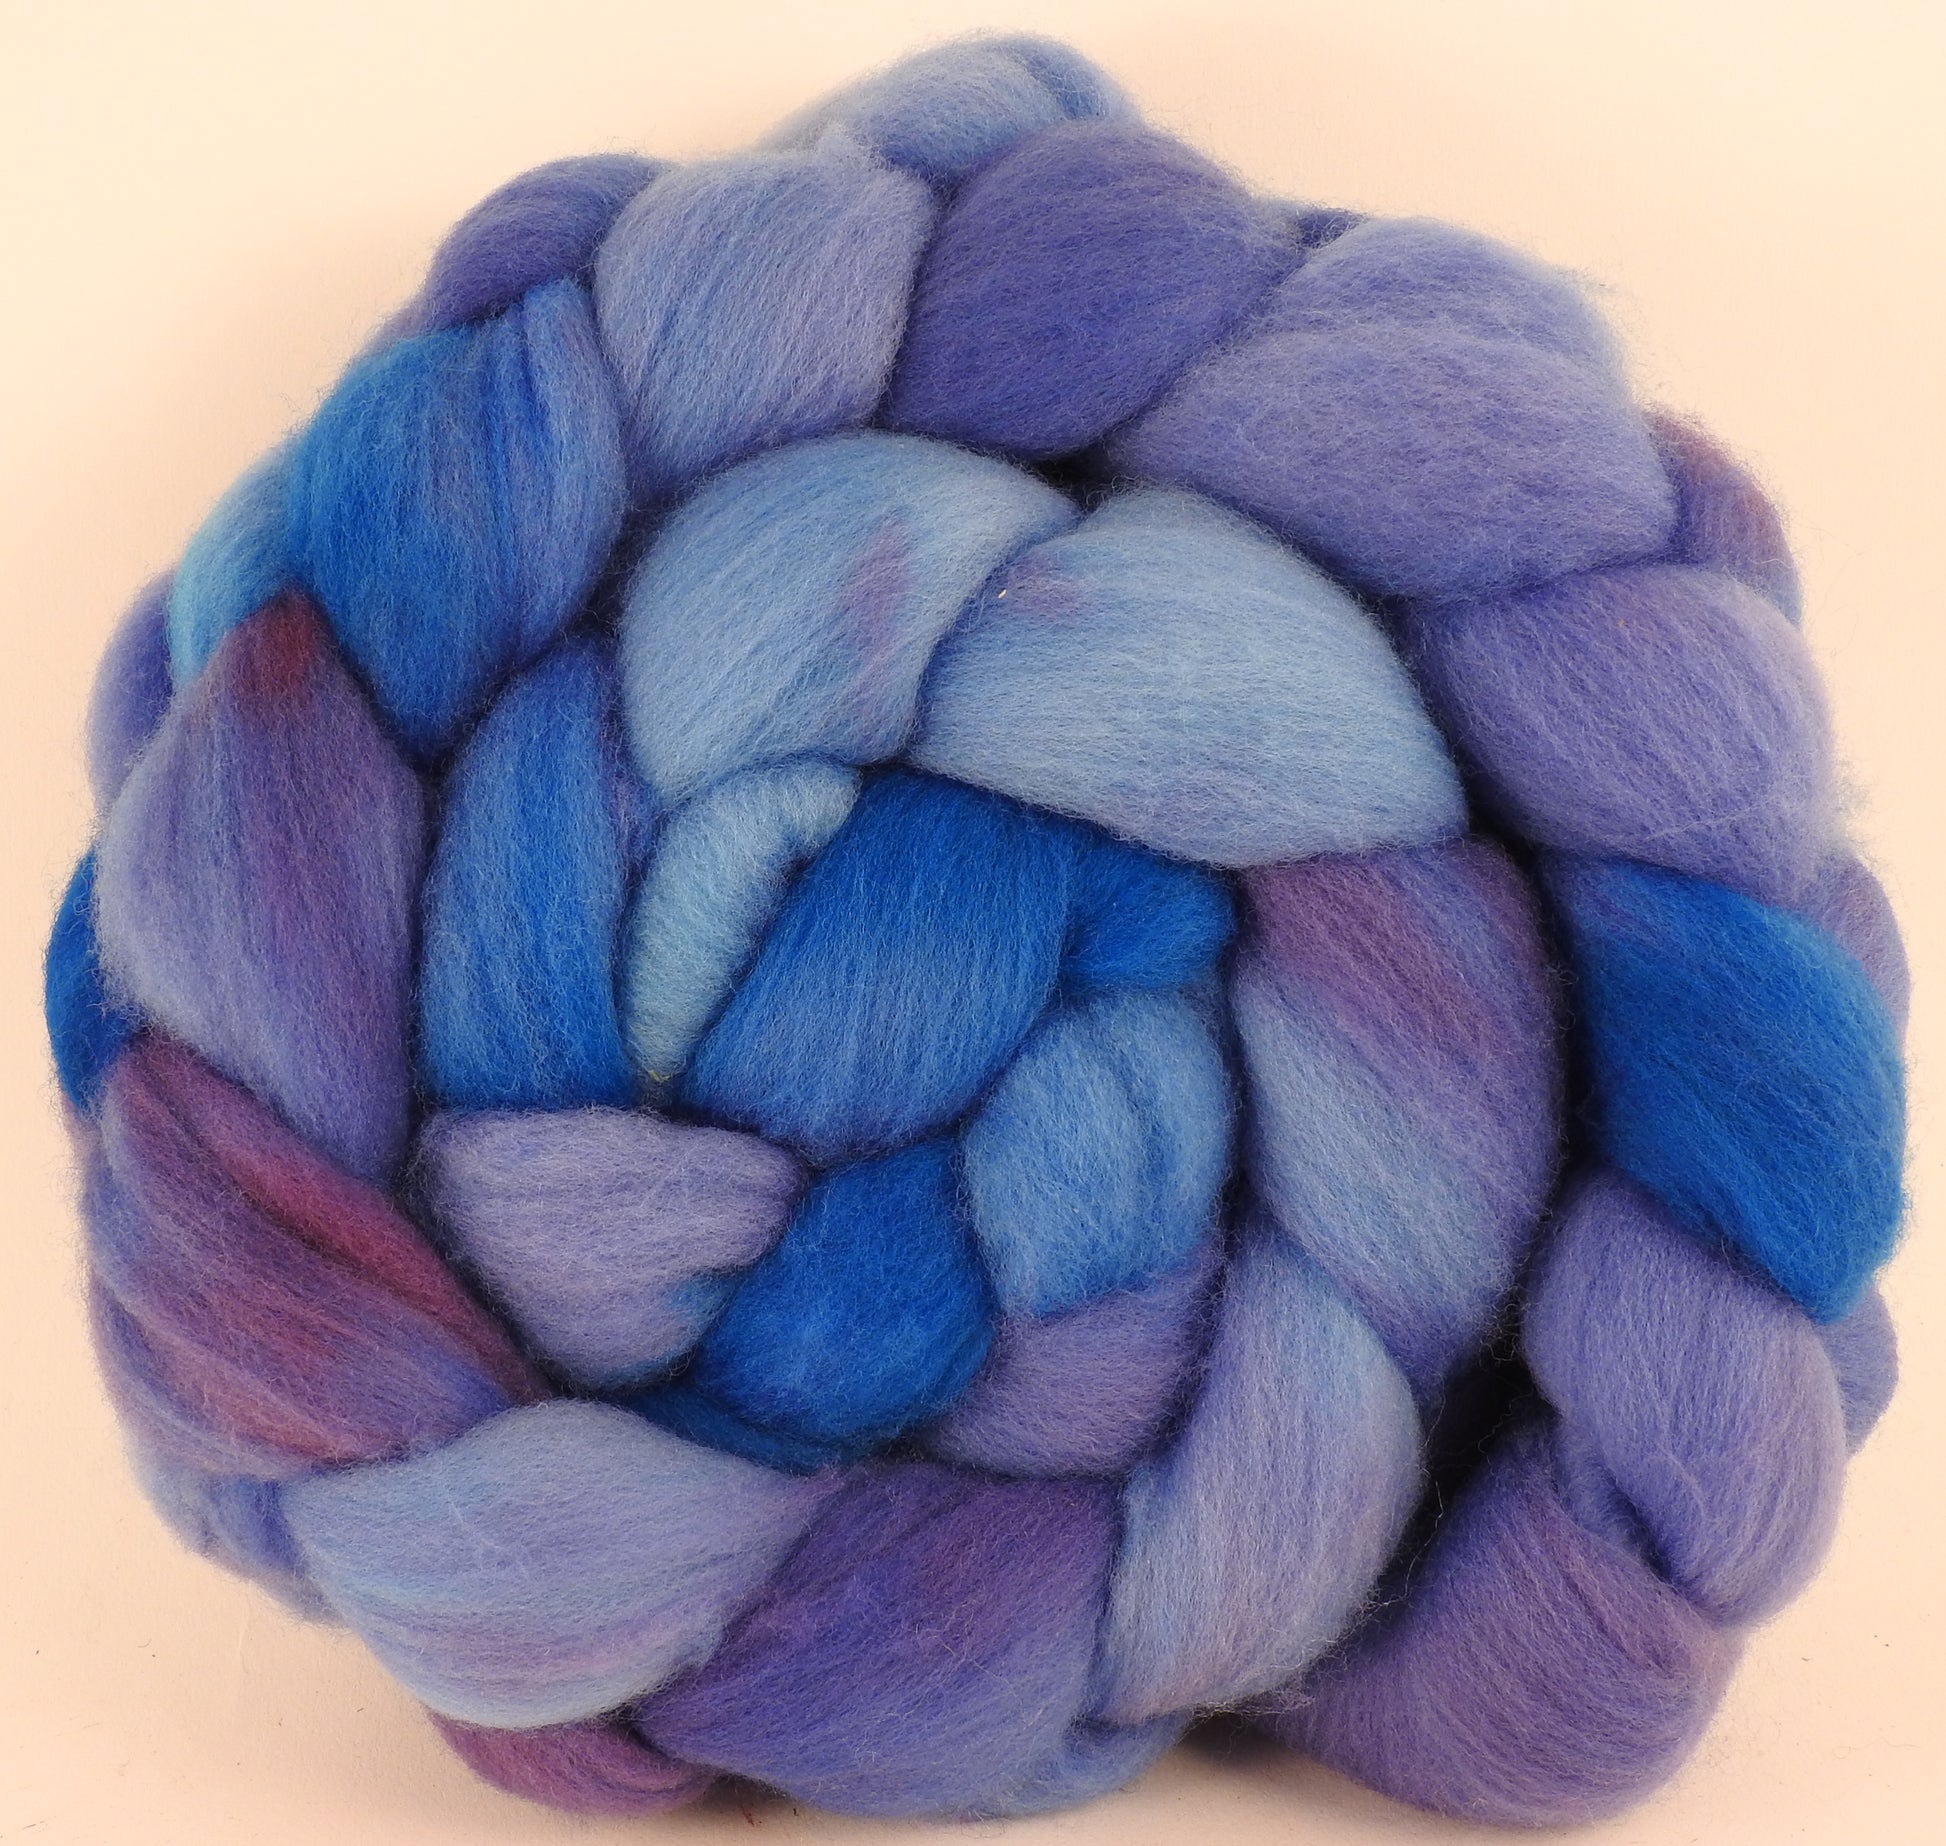 Hand dyed top for spinning -Forget Me Not- (5.3 oz.) Organic Polwarth - Inglenook Fibers